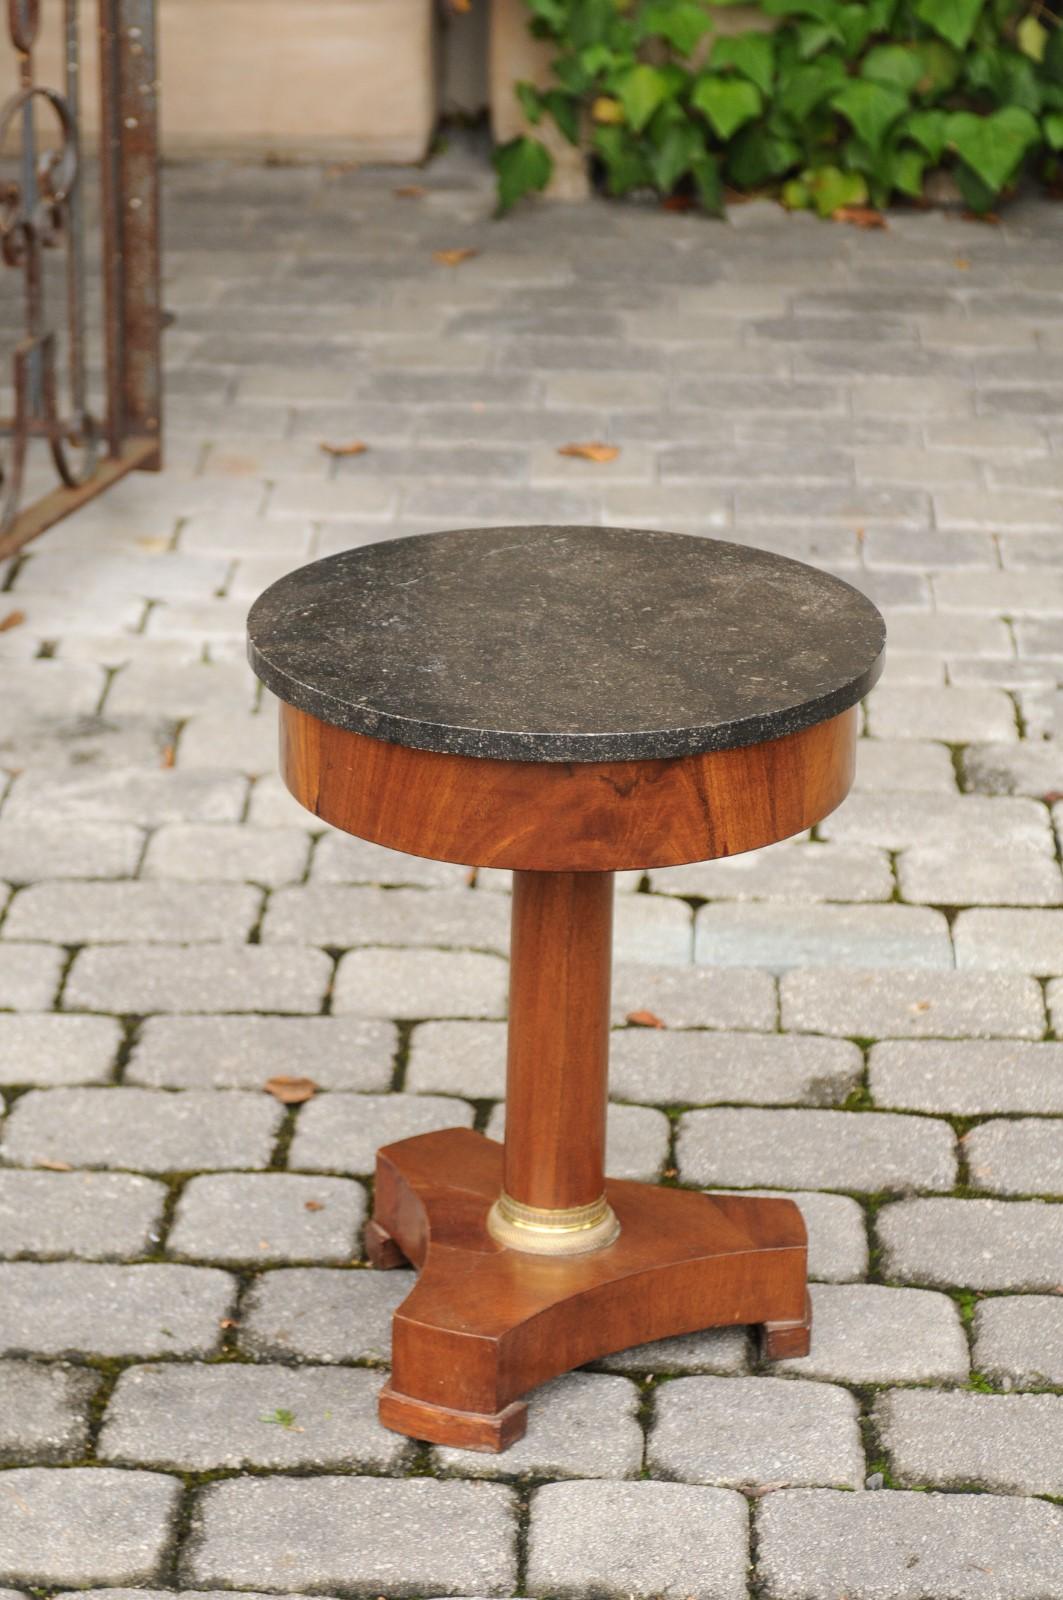 Petite 1870s French Empire Style Guéridon Table with Marble Top and Pedestal 4